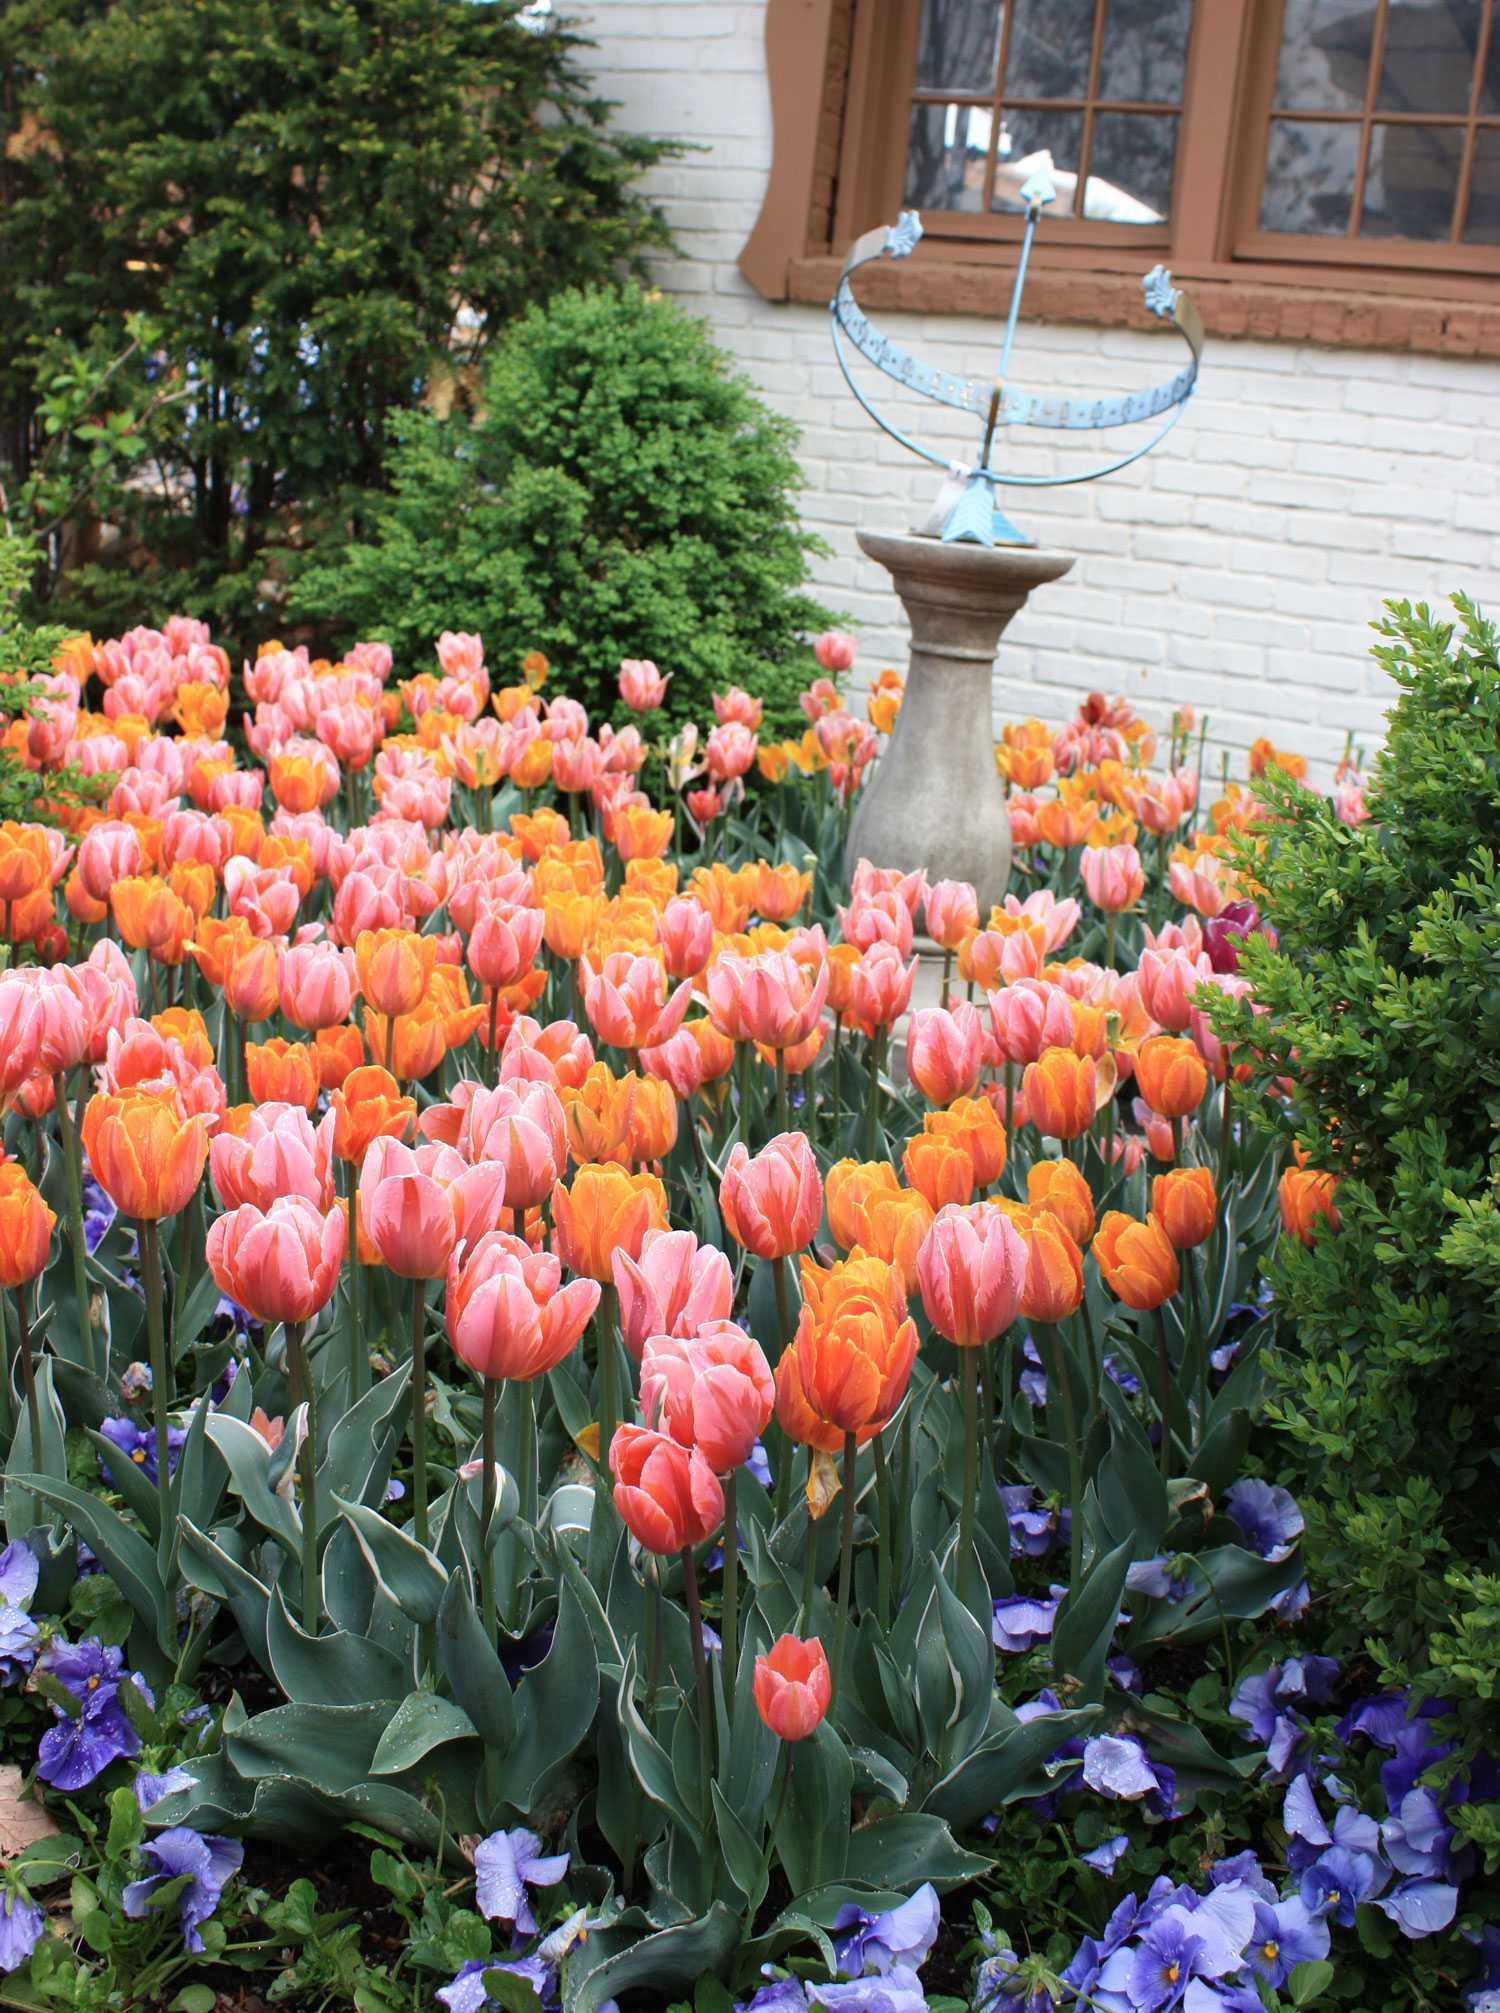 Orange and Peach Tulips planted with Blue Pansy in  Garden. Peter Atkins and Associates